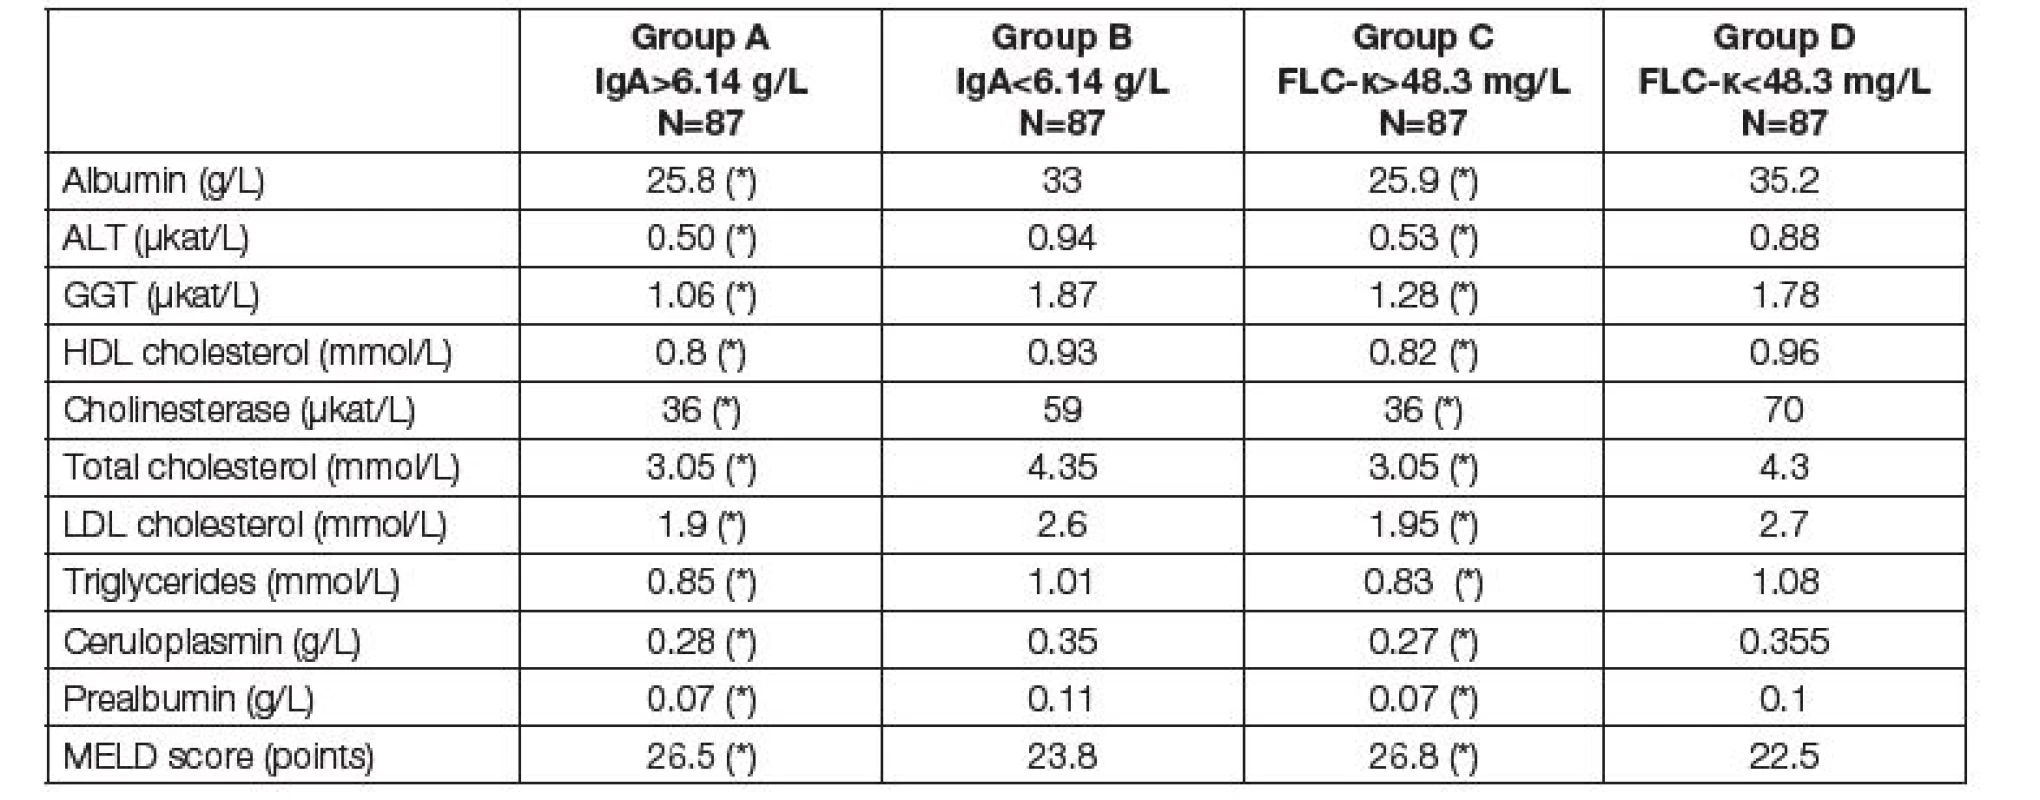 Medians of parameters of liver function and nutritional parameters before LTx. Comparison of two subgroups with
respect to different criteria. Groups A and B according to the total IgA; group A above median of 6.14 g/L, group B up to median
of 6.14 g/L. Groups C and D according to the FLC-κ; group C above median of 48.3 mg/L, group D up to median of 48.3
mg/L. Asterisk (*) means significant difference between group A and B, or C and D, respectively (Mann-Whitney test).